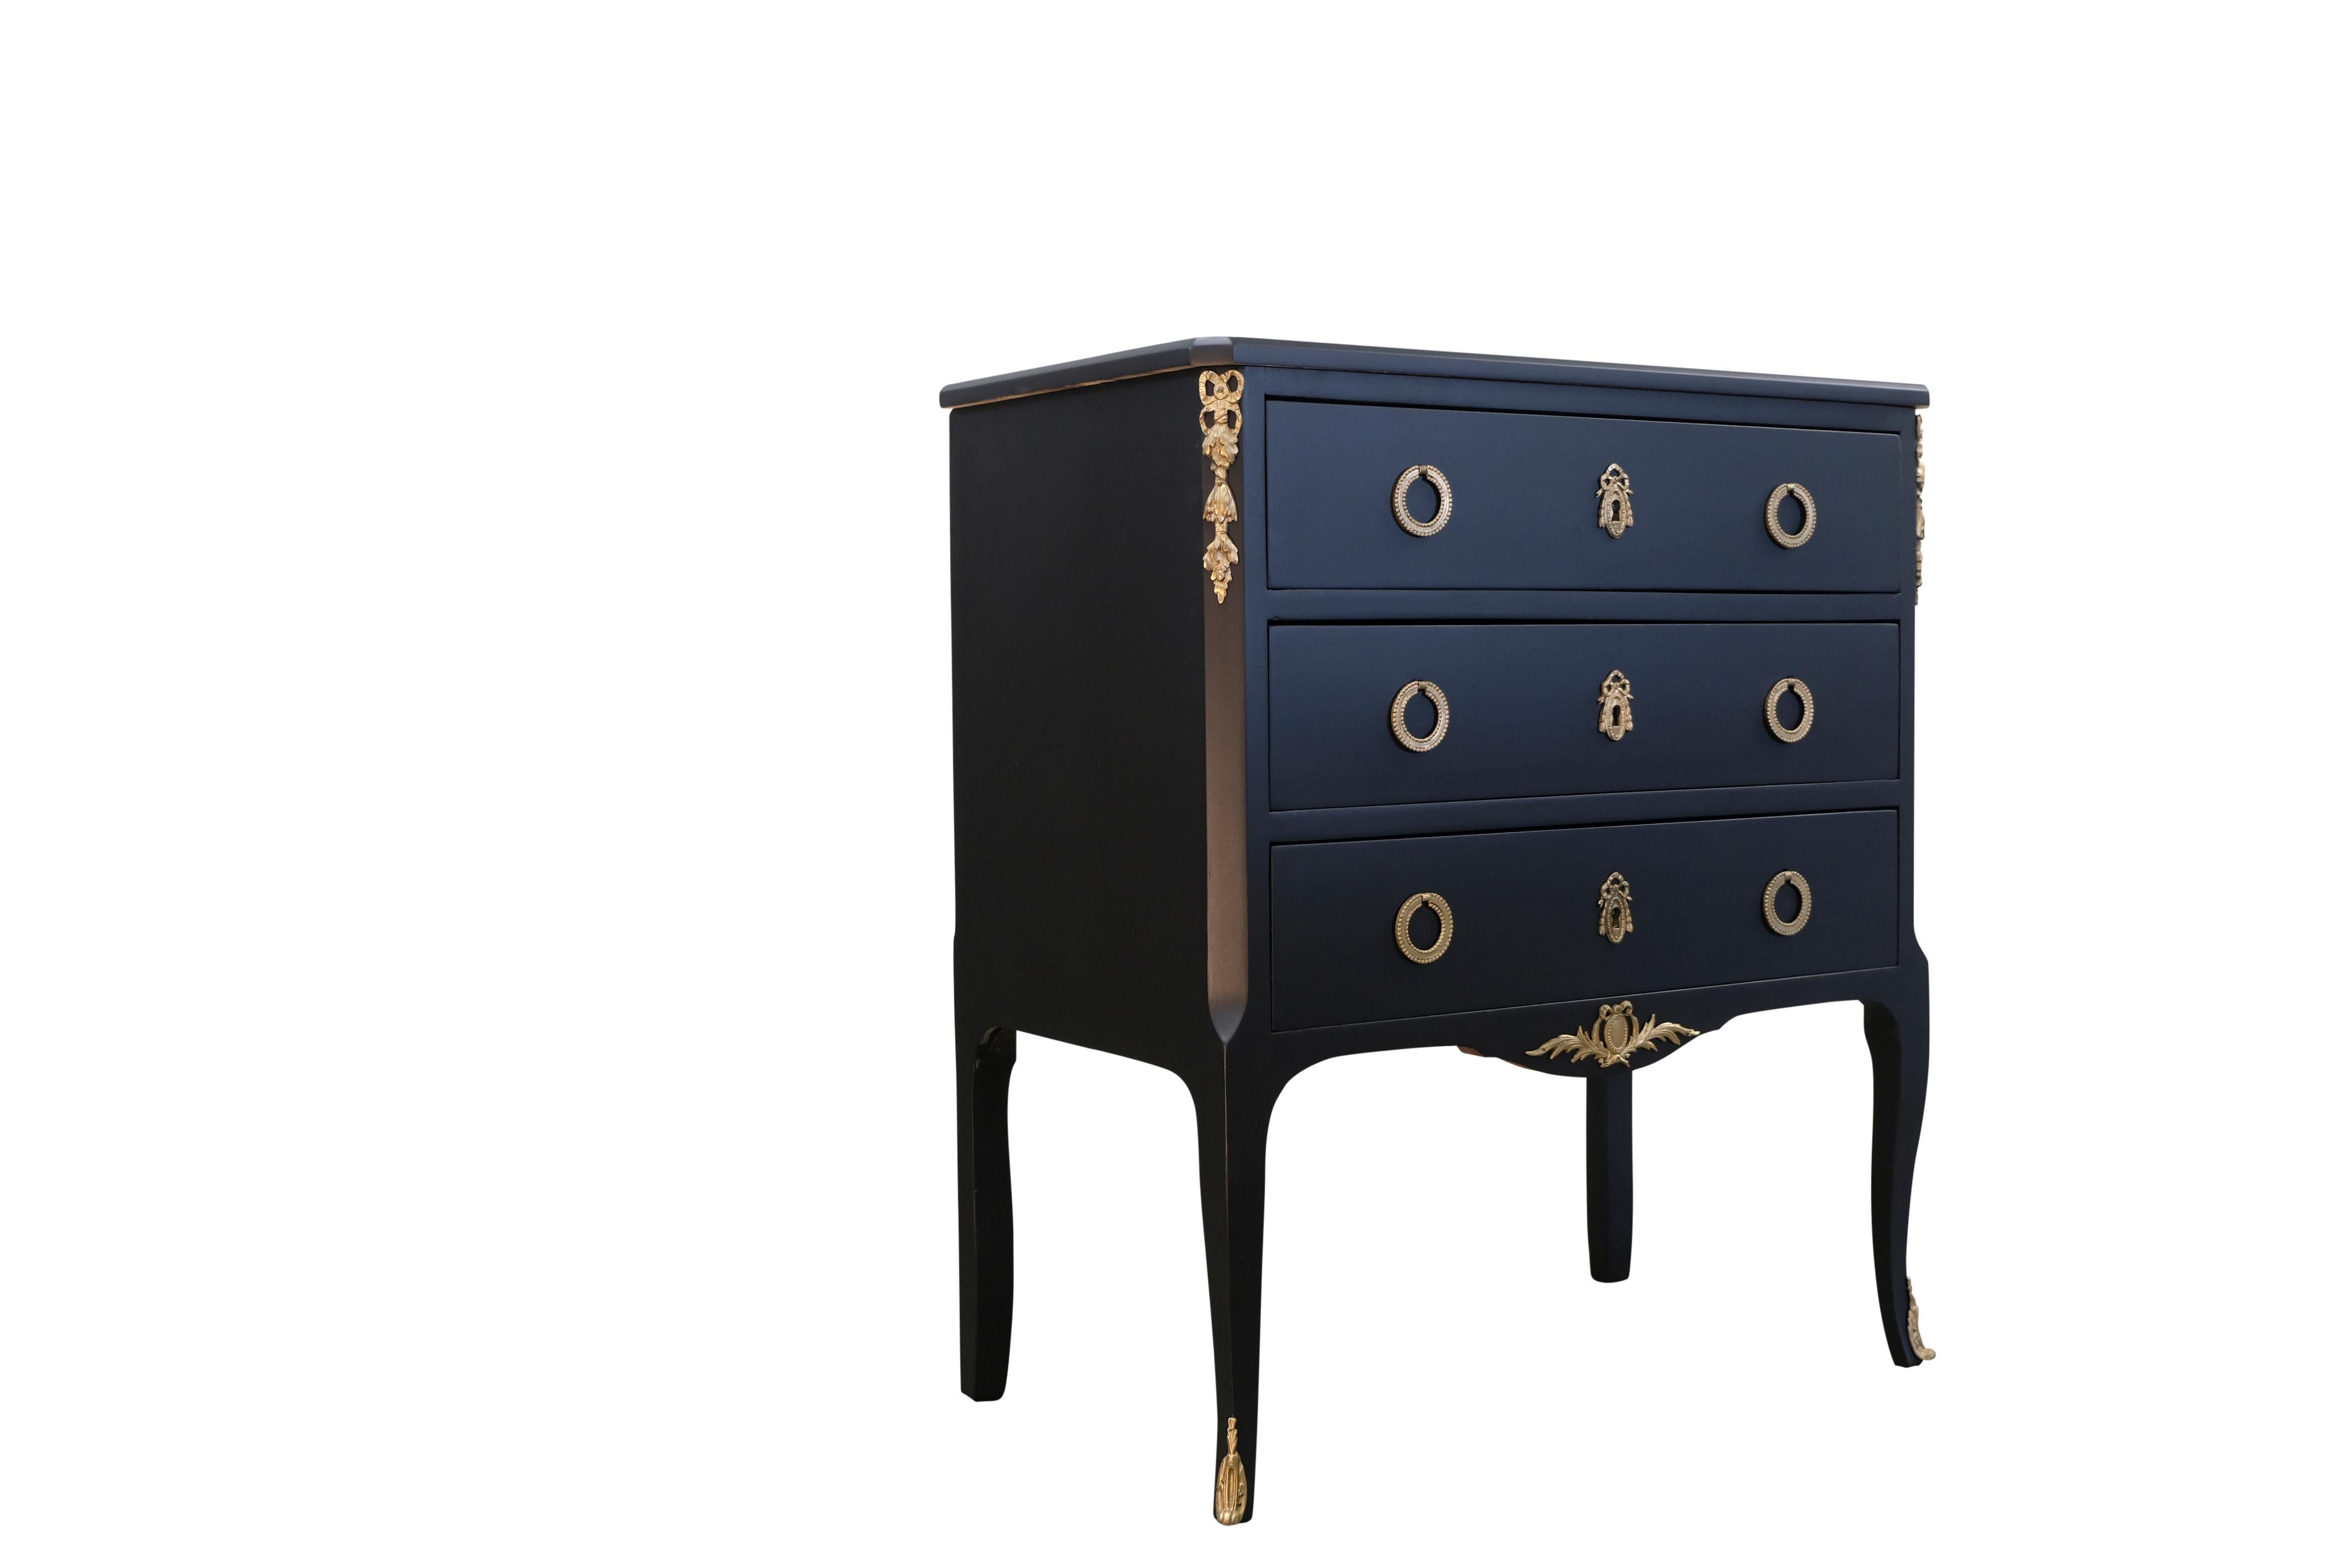 A Louis XV style chestwith original brass details and handles in birch wood with a Black fine painted finish with Fine Brass Fittings and a Marble Top.  
Width: 73cm / 28.7